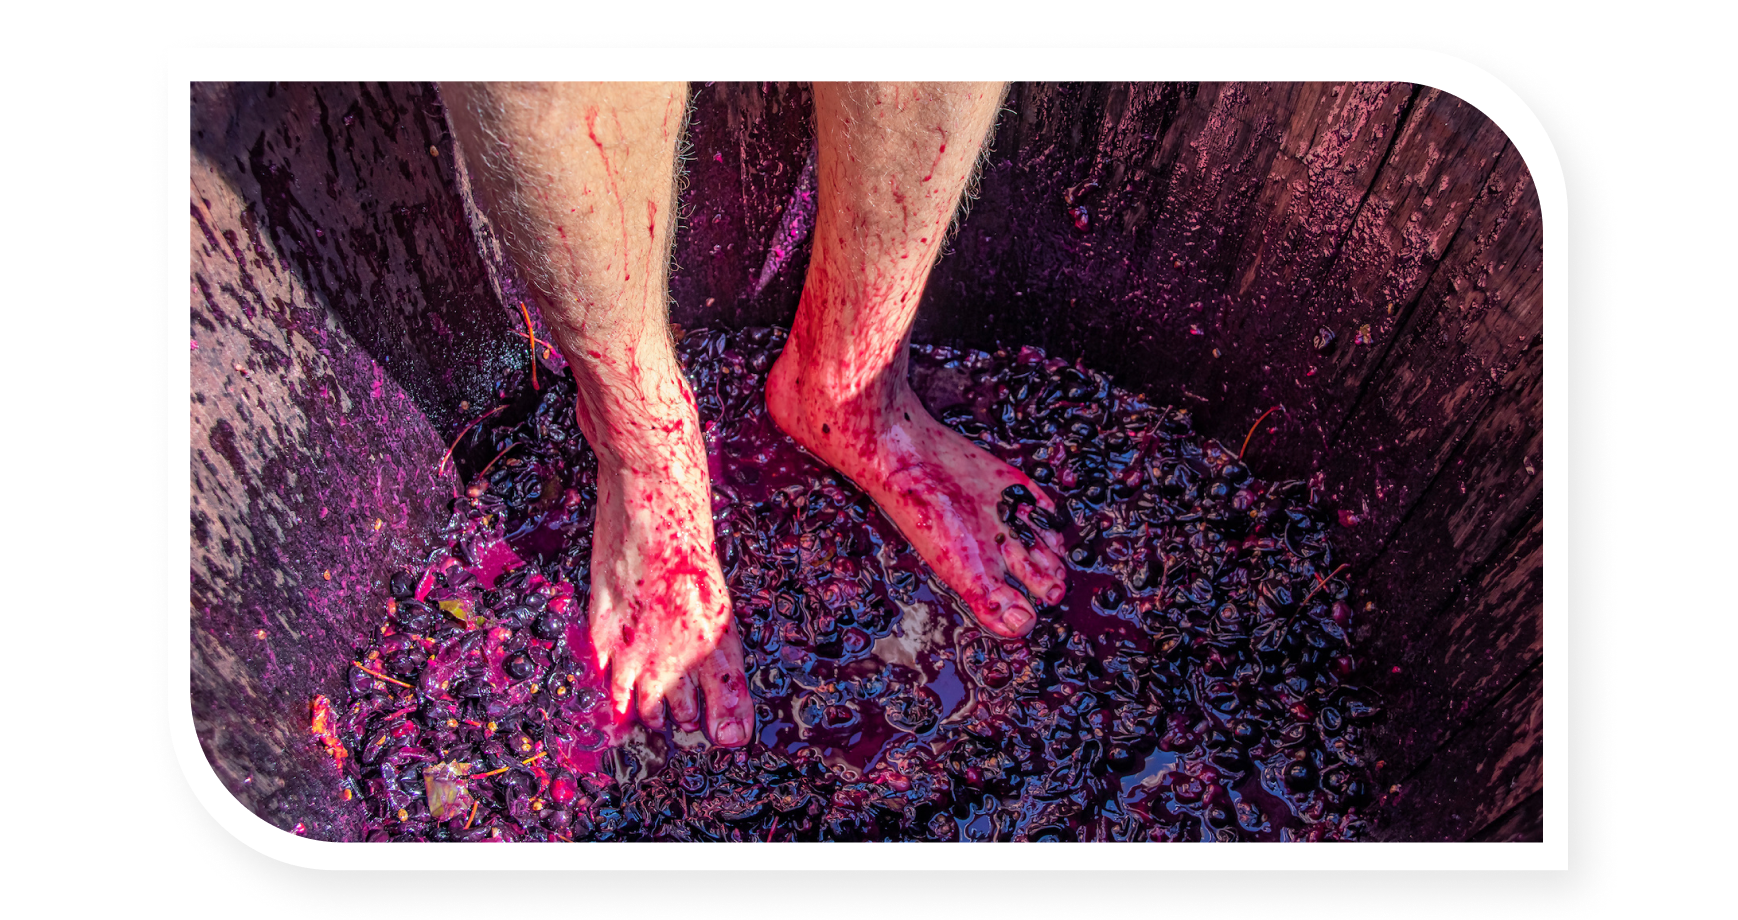 Person crushing grapes barefoot